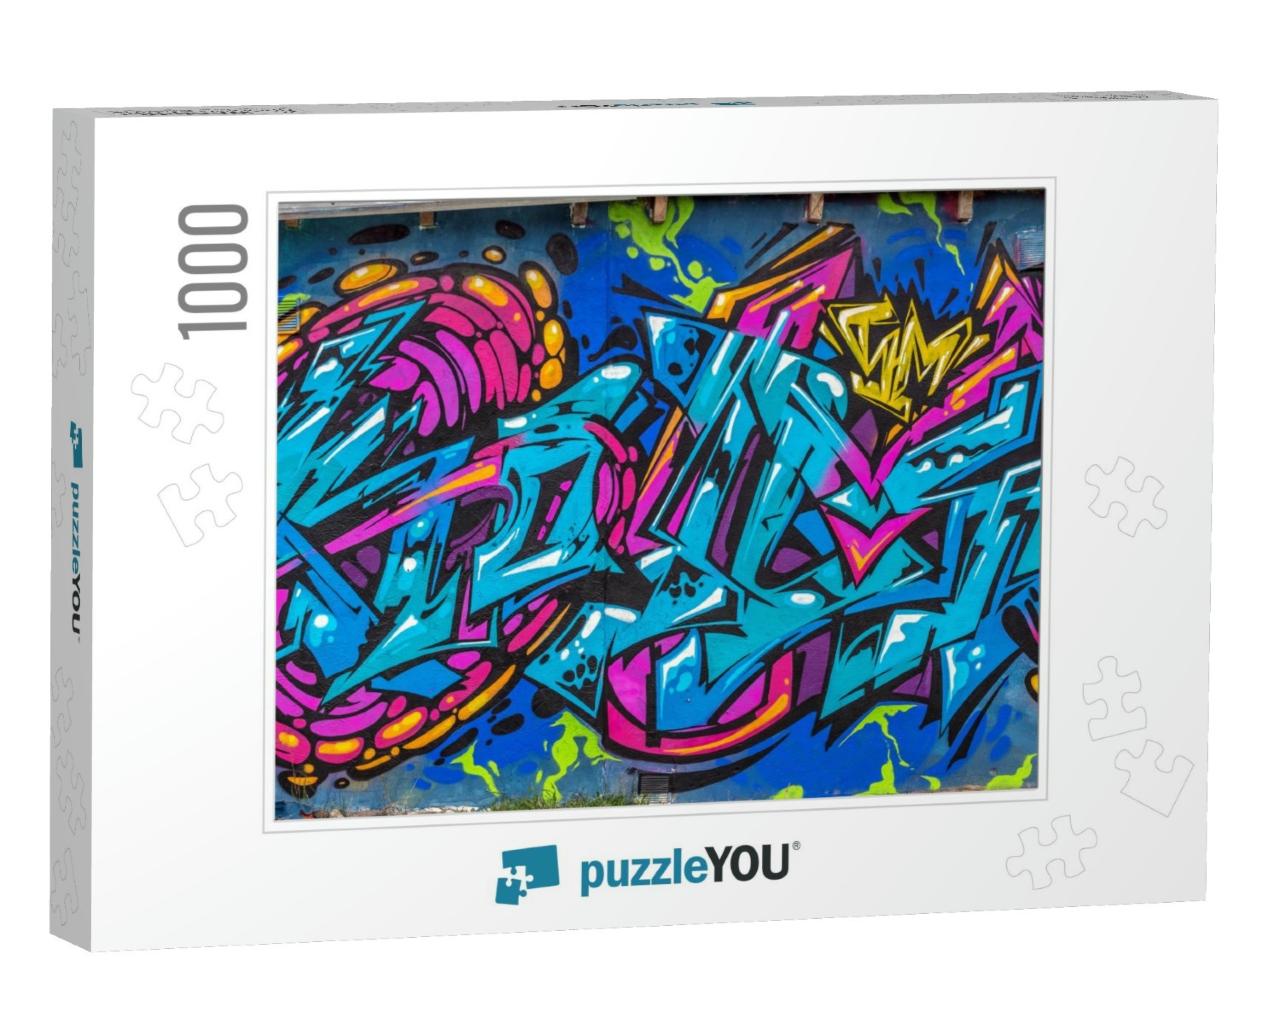 Beautiful Street Art Graffiti. Abstract Creative Drawing... Jigsaw Puzzle with 1000 pieces